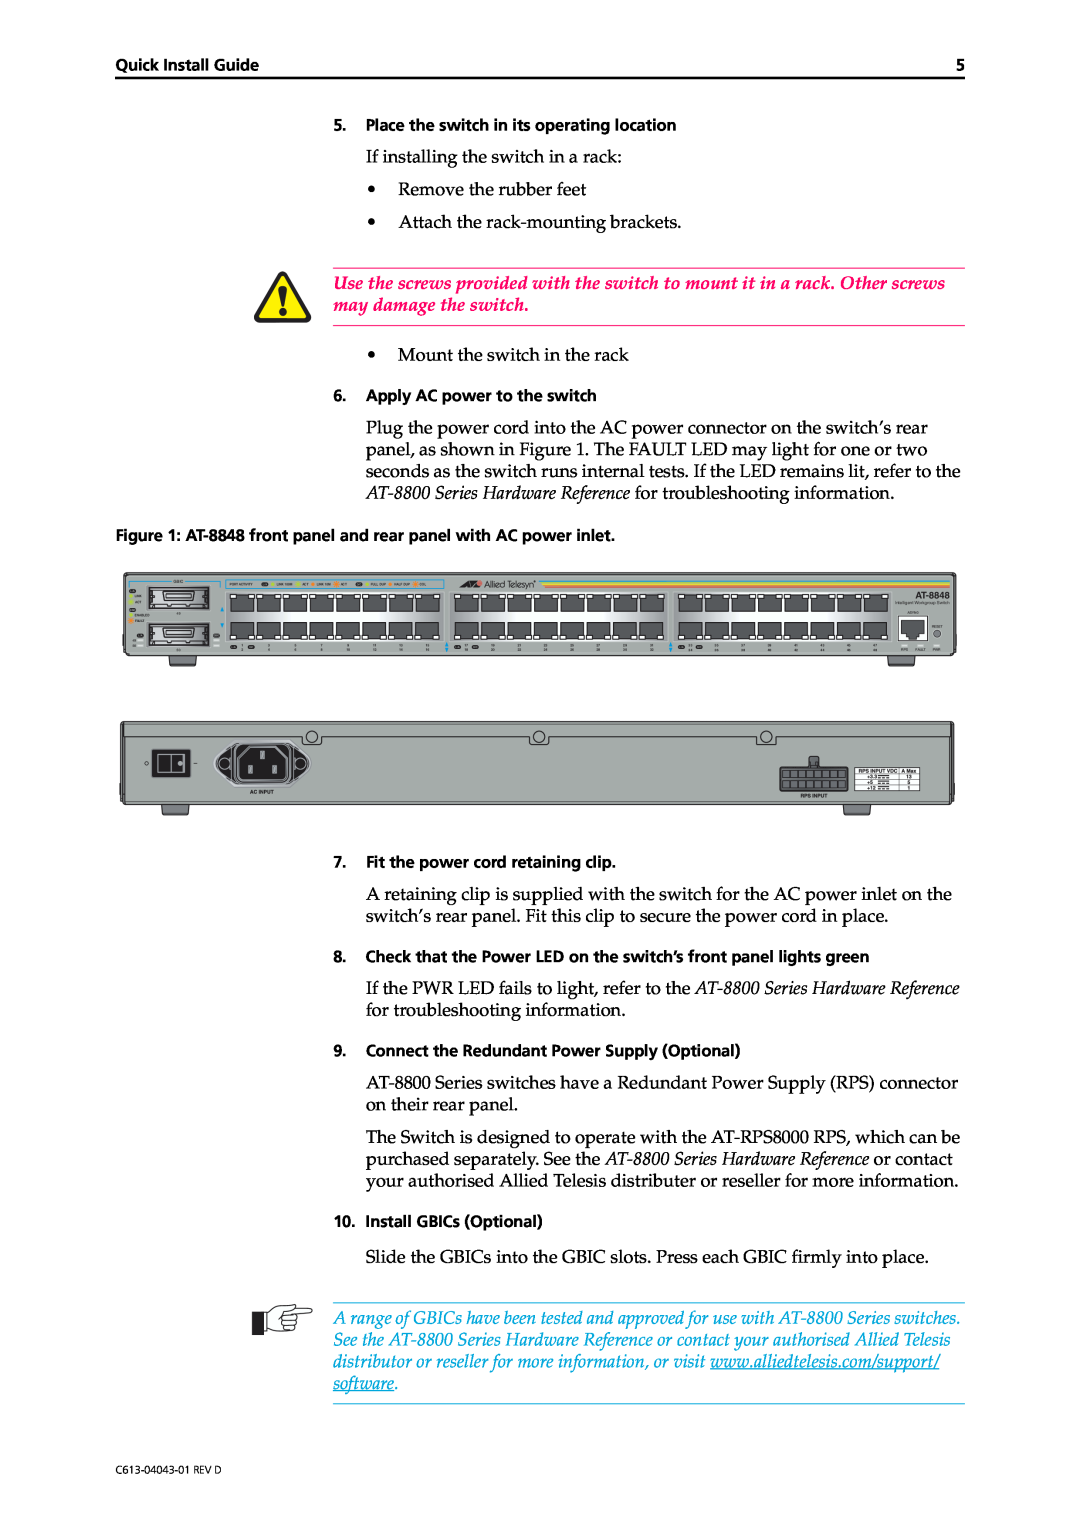 Allied Telesis AT-8848, AT-8800 Series, AT-8824 manual If installing the switch in a rack Remove the rubber feet 